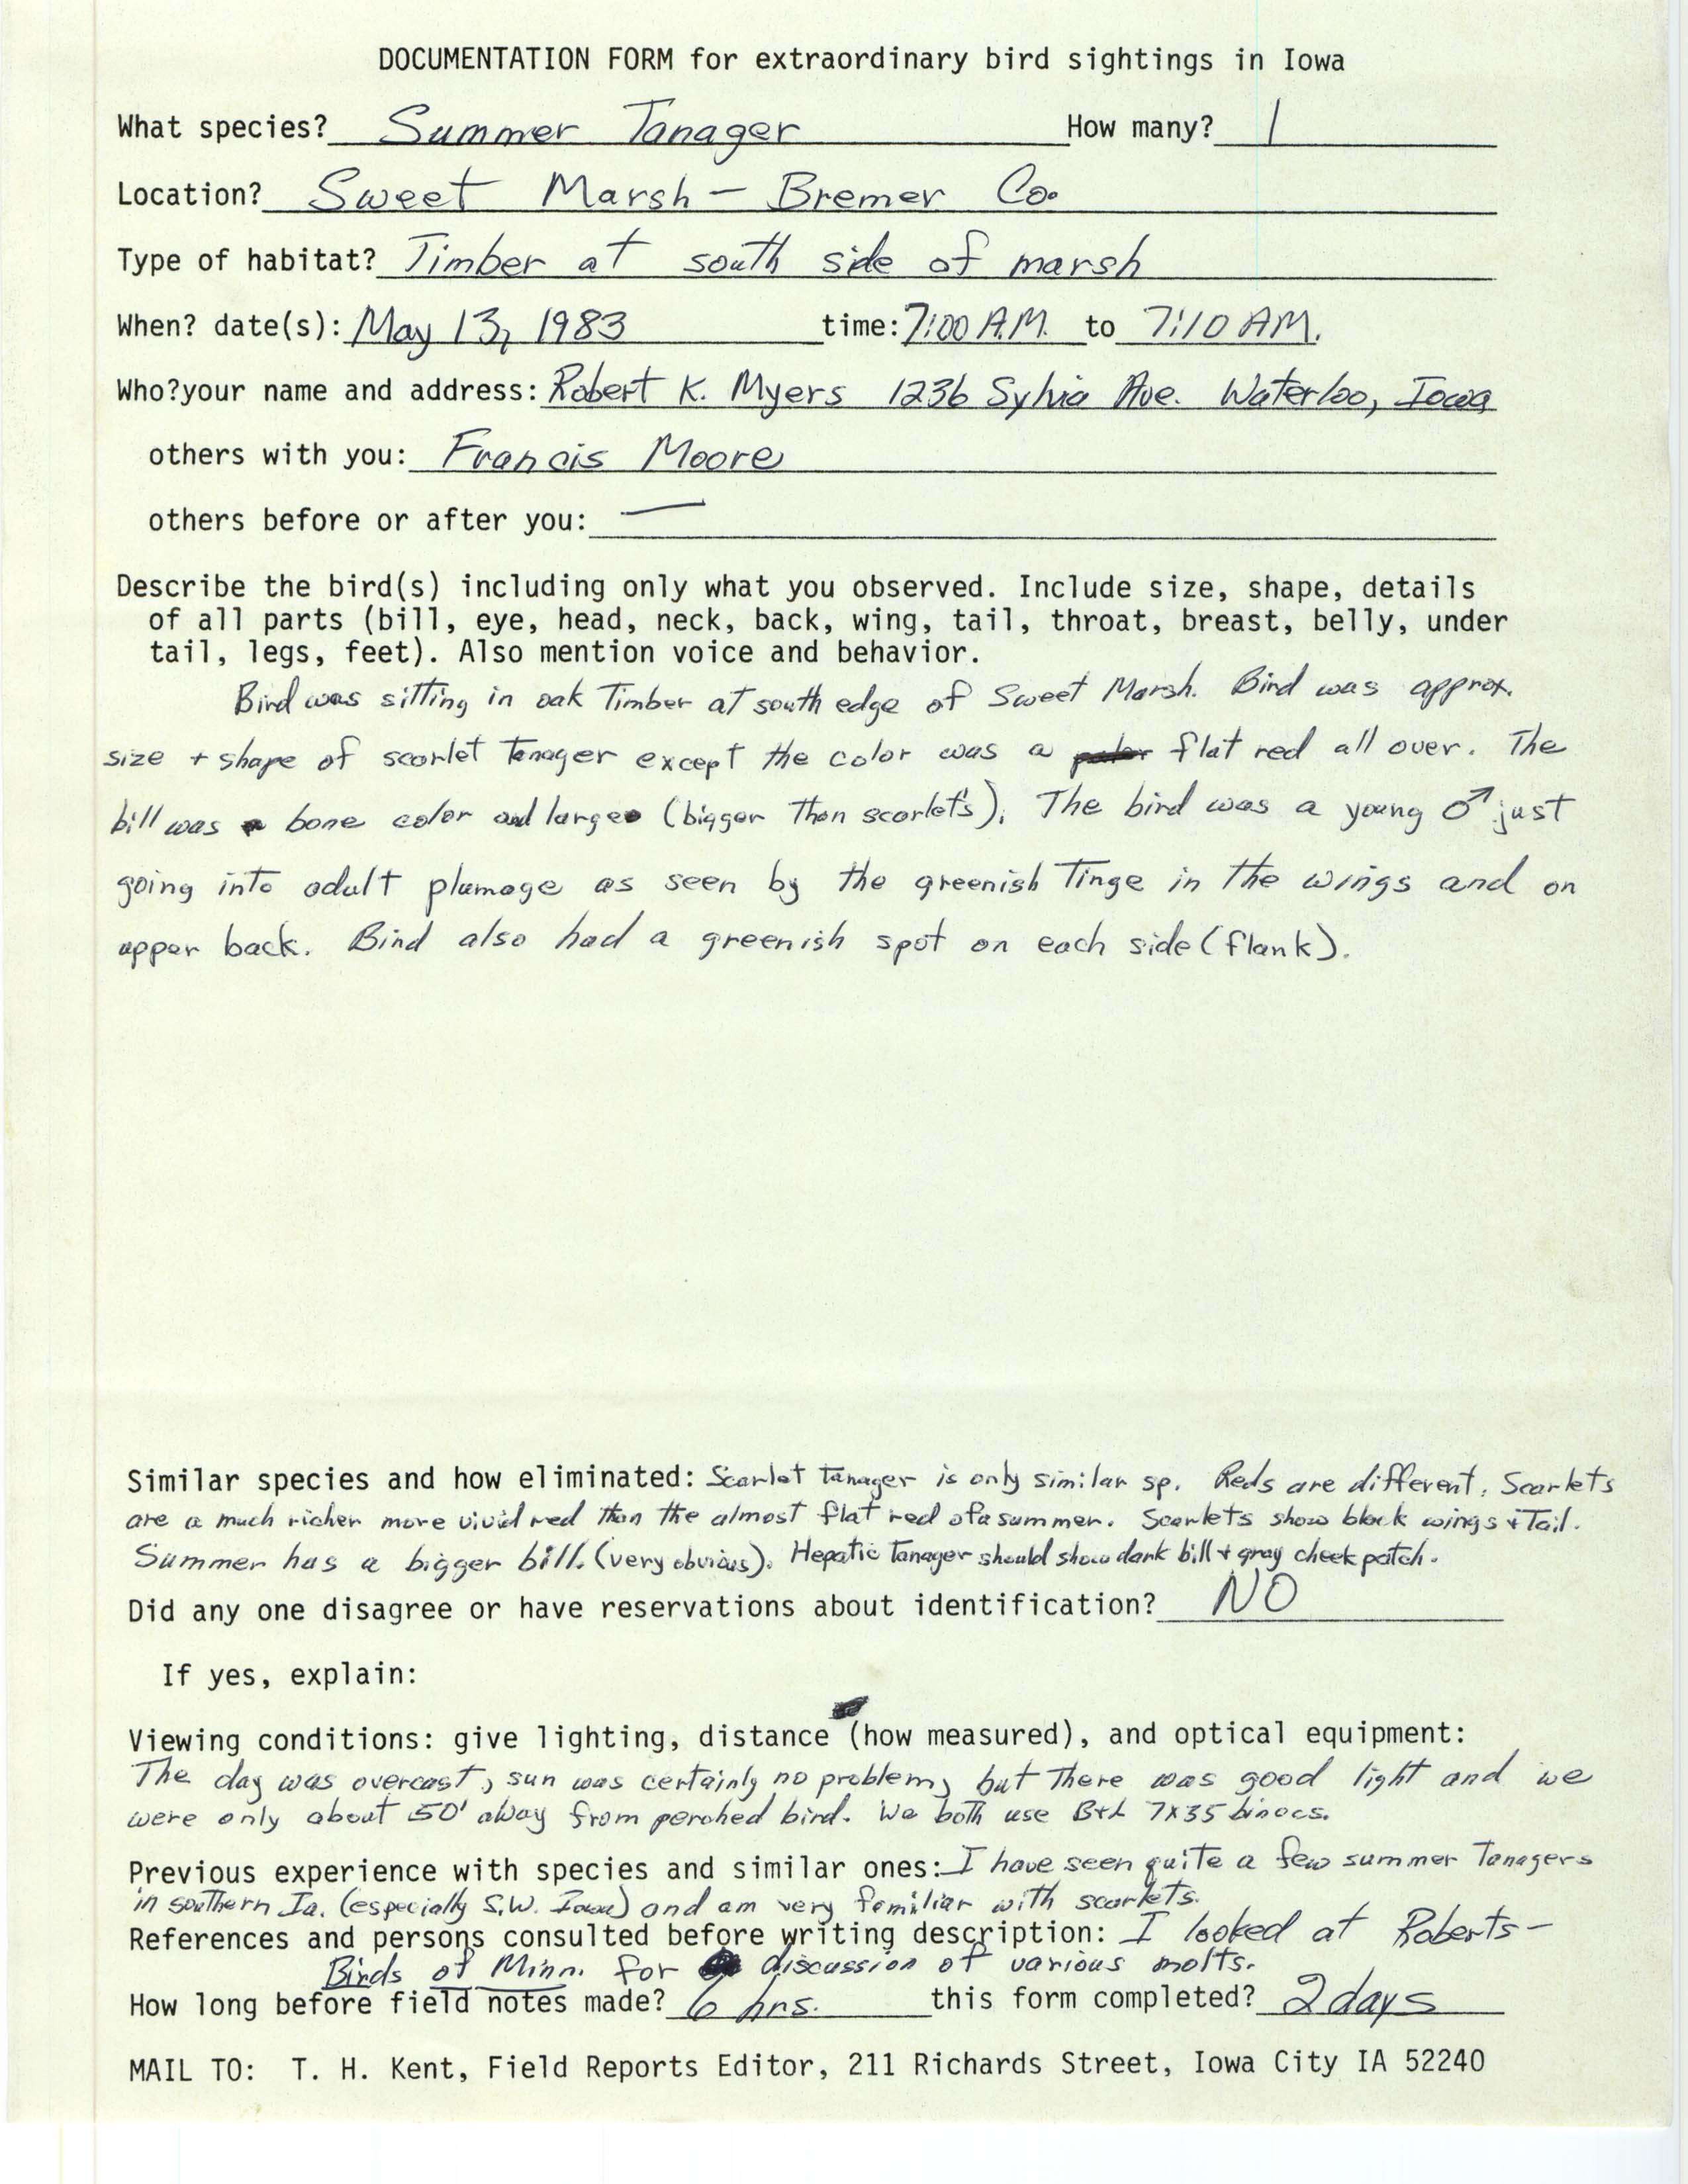 Rare bird documentation form for Summer Tanager at Sweet Marsh in 1983